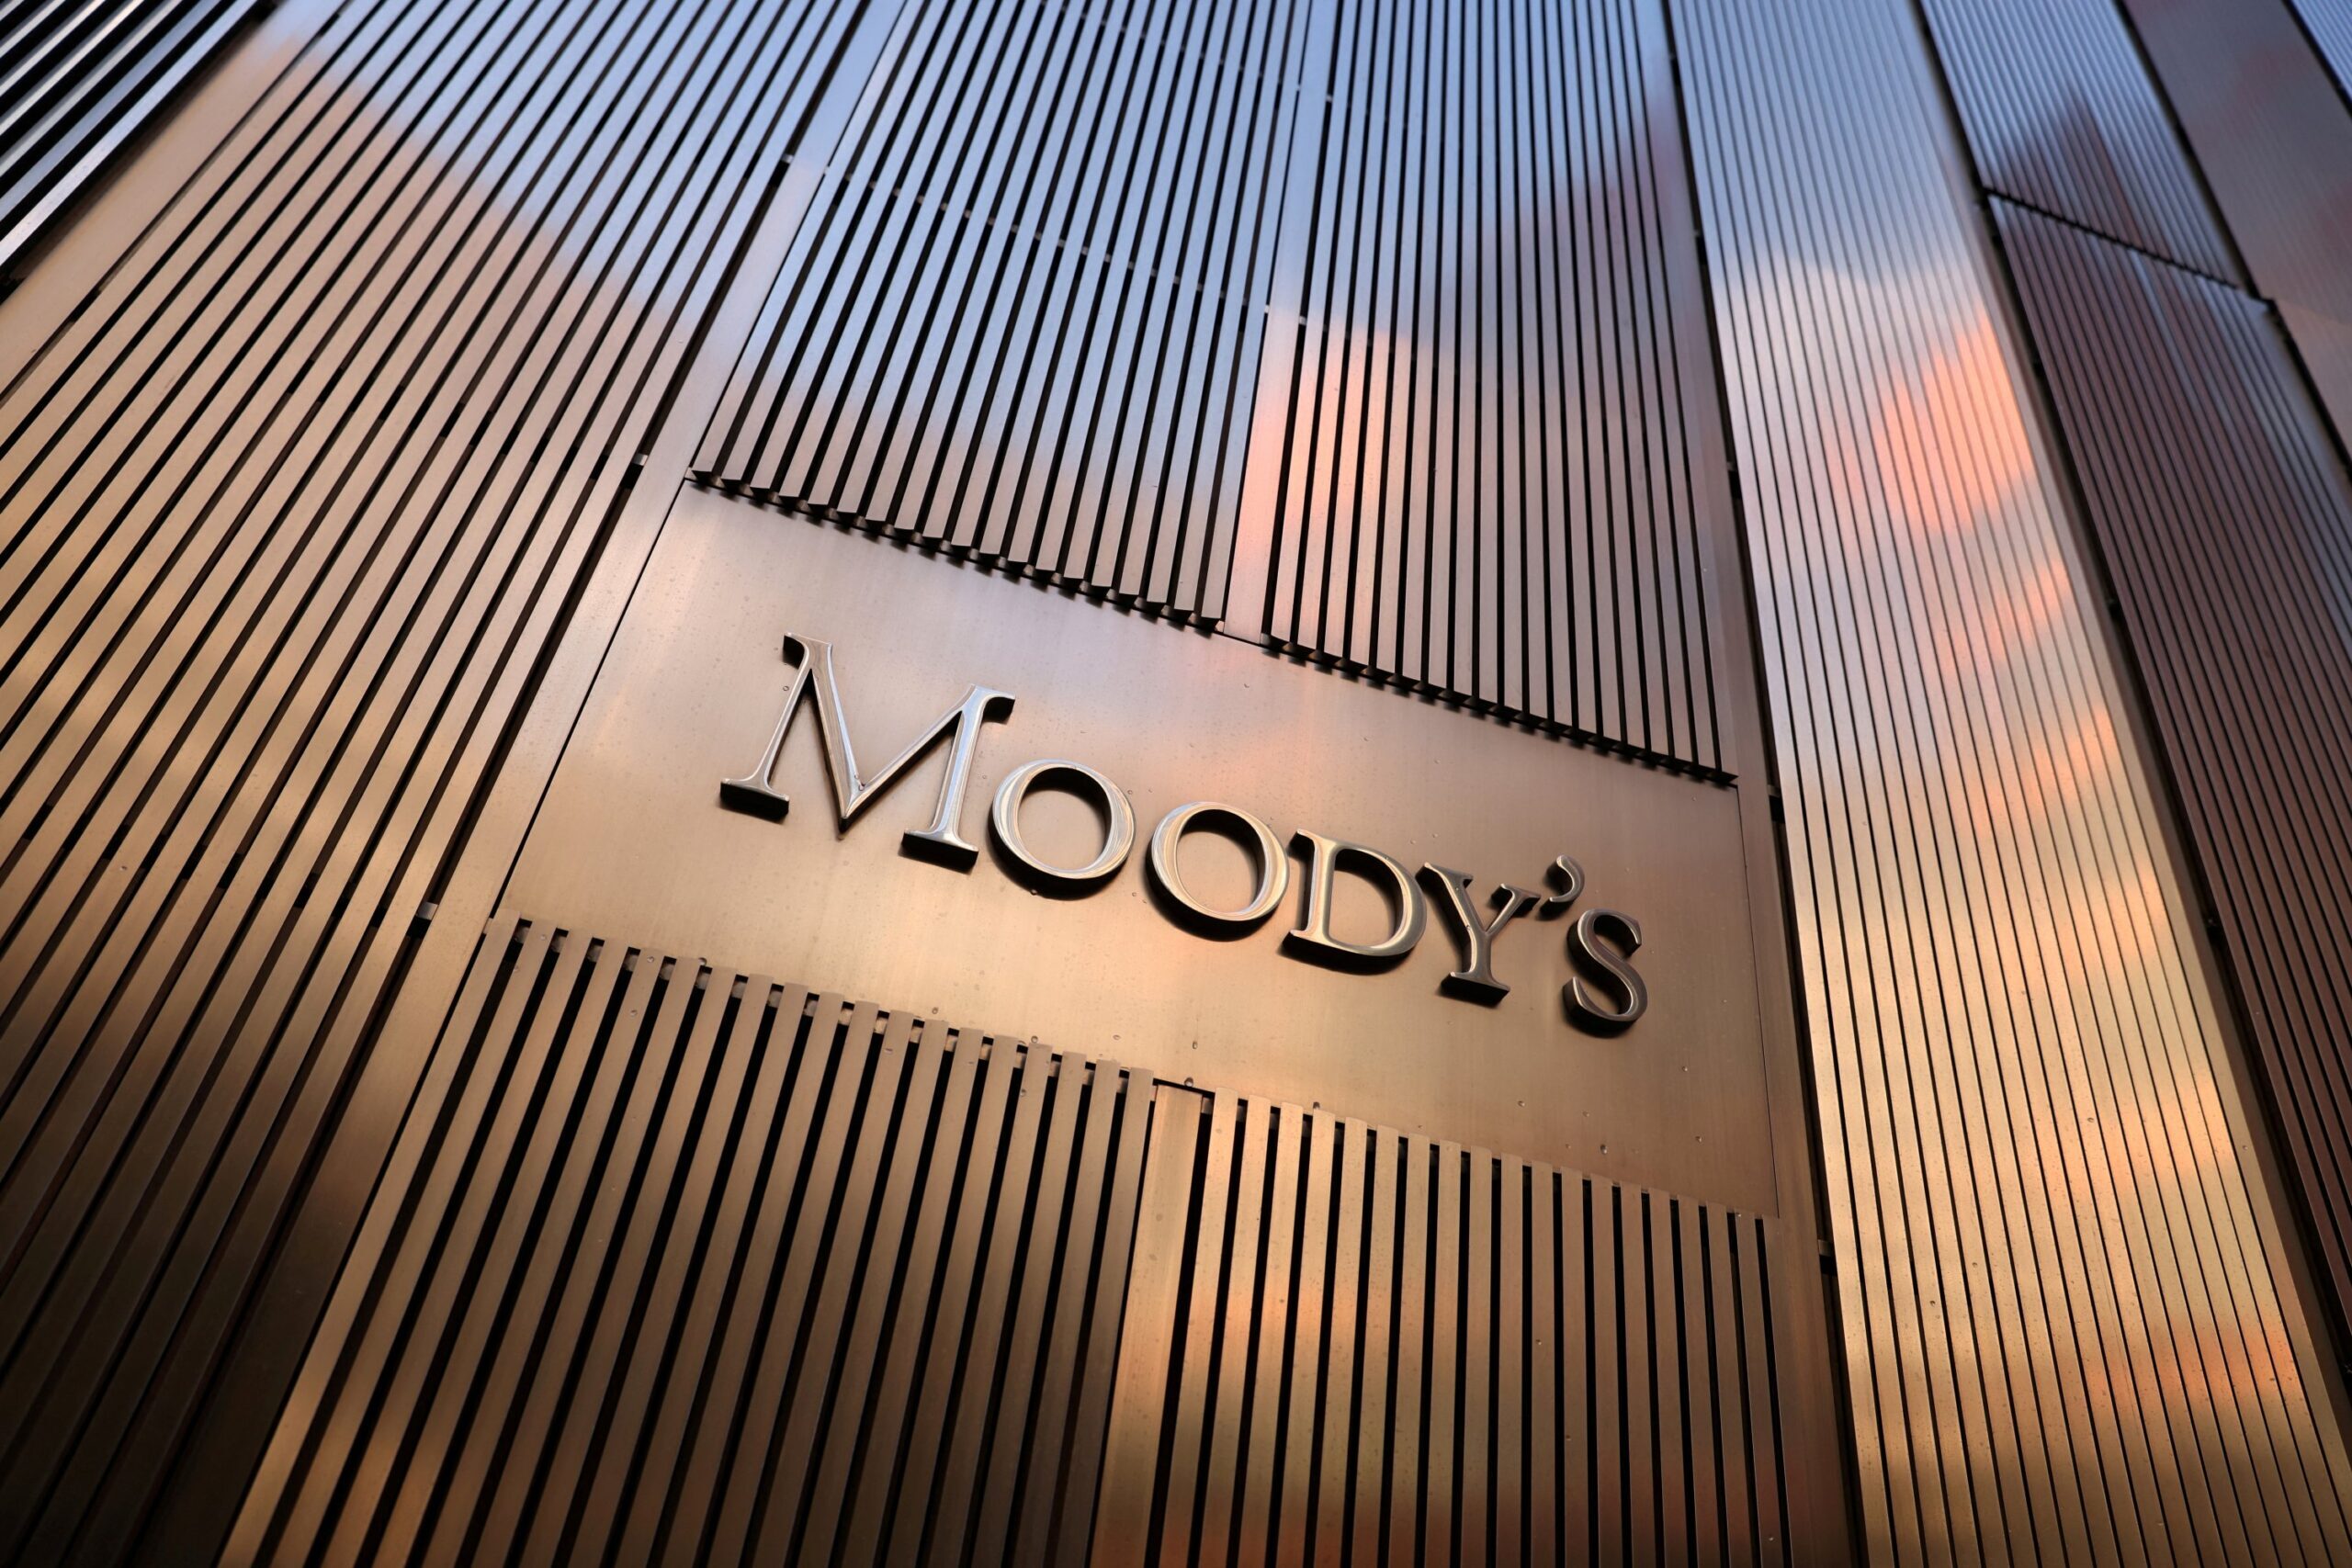 Türkiye's Moody's rating could go up 2 levels at once: BBVA strategist